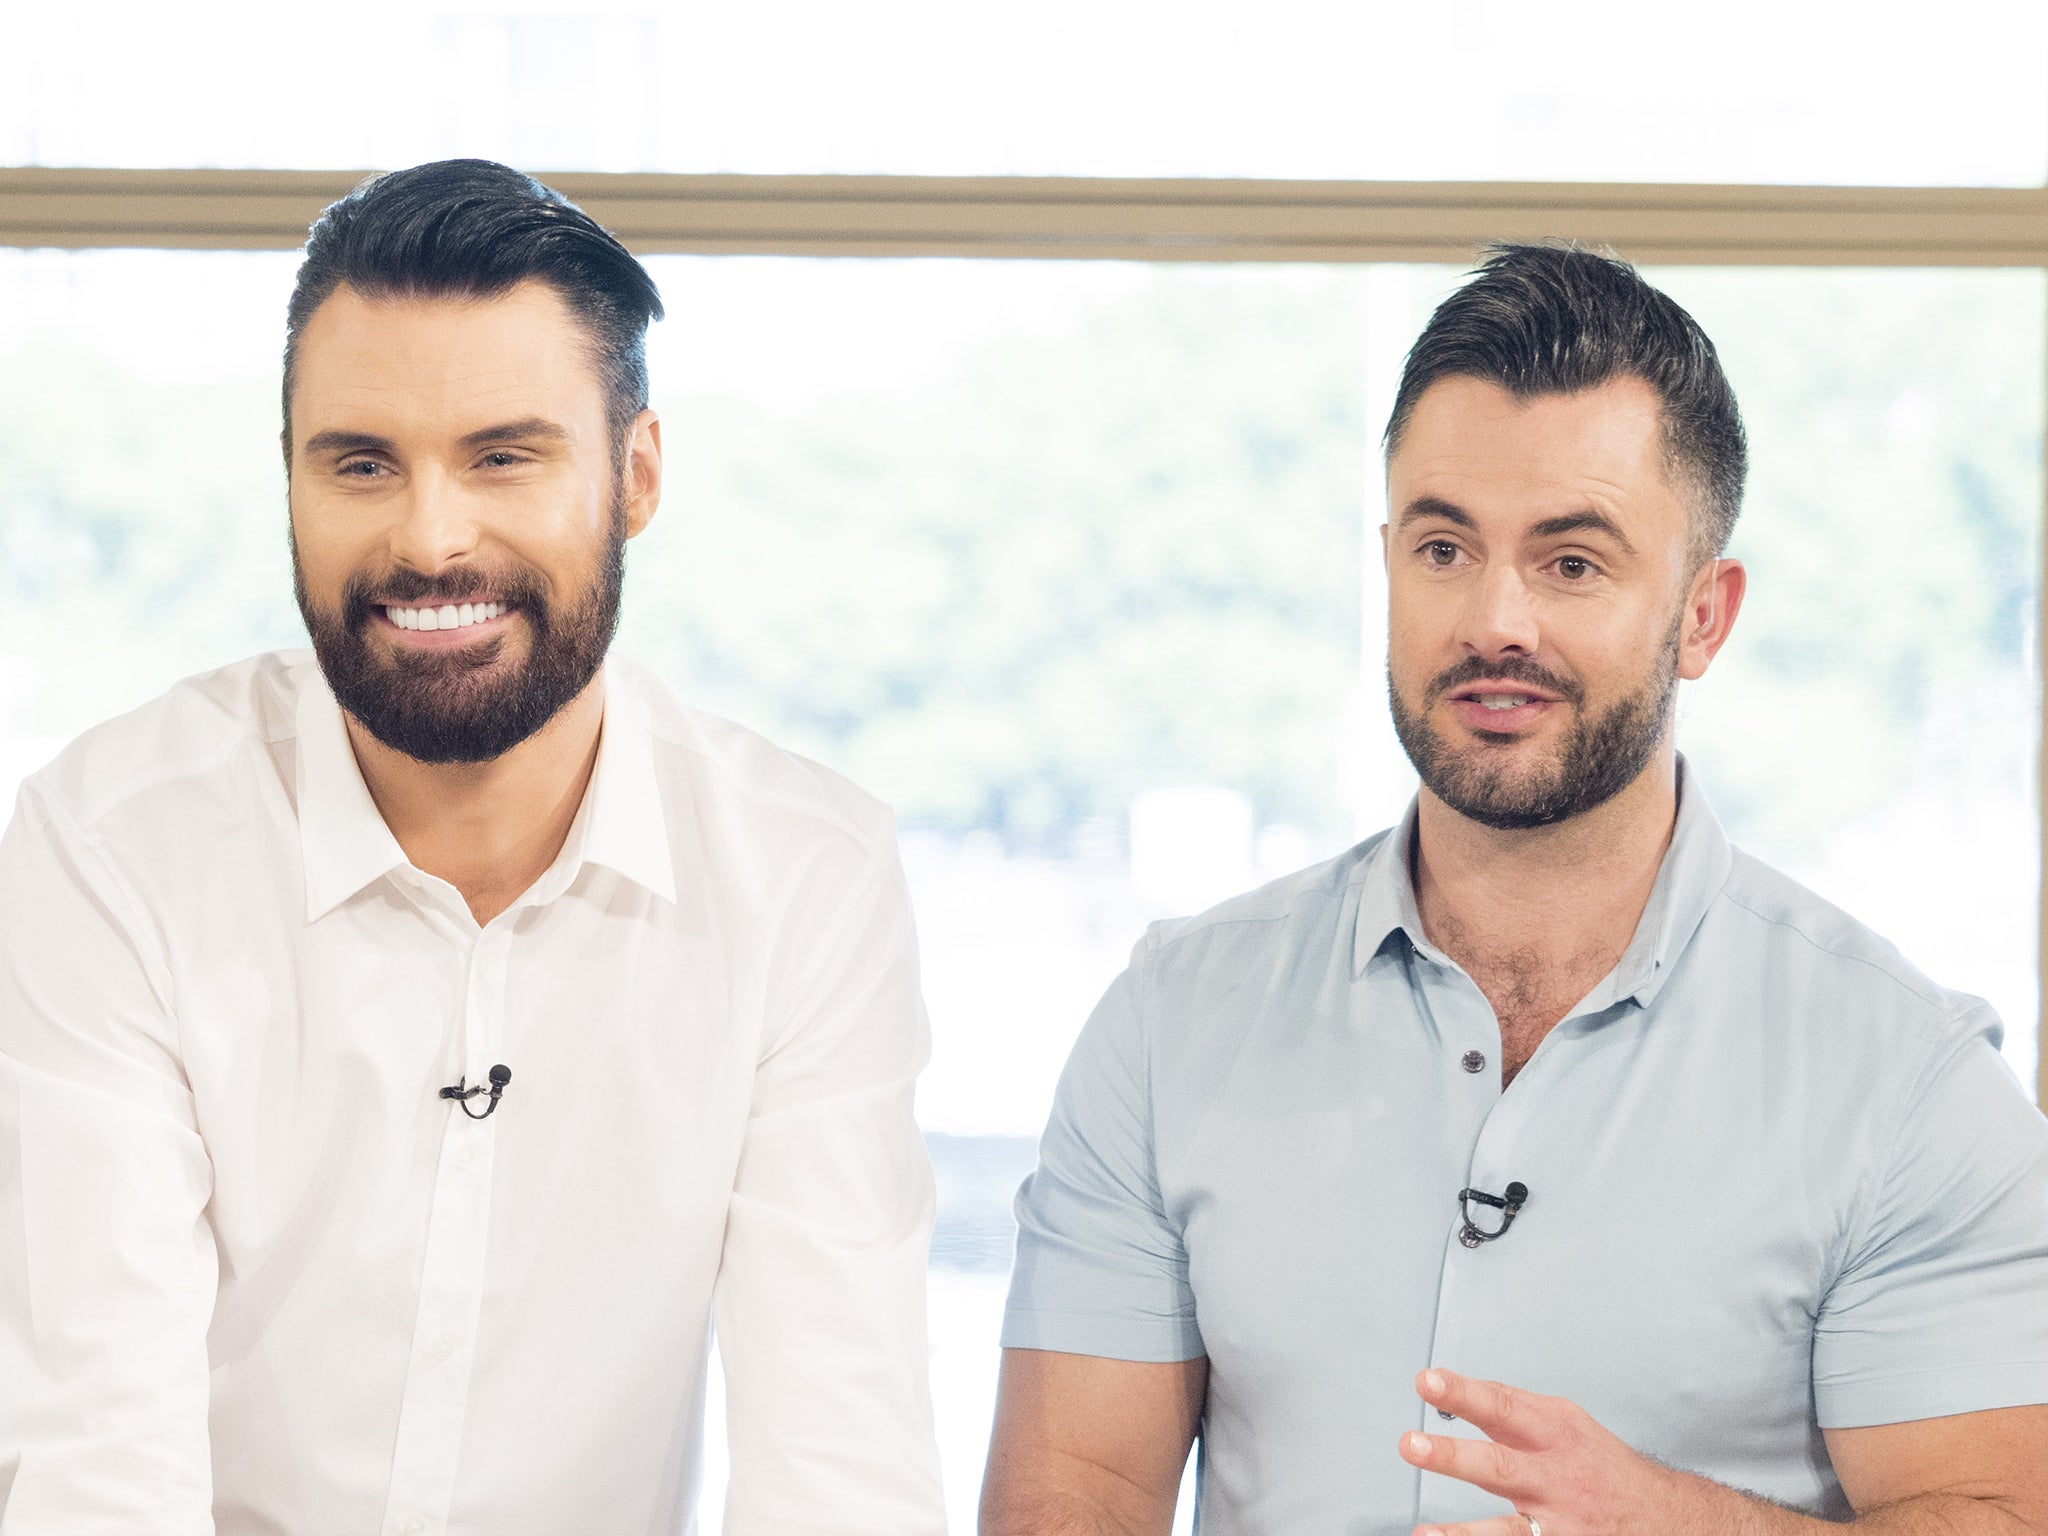 Rylan Clark Says His Body Shut Down And His Speech Was Slurred Amid